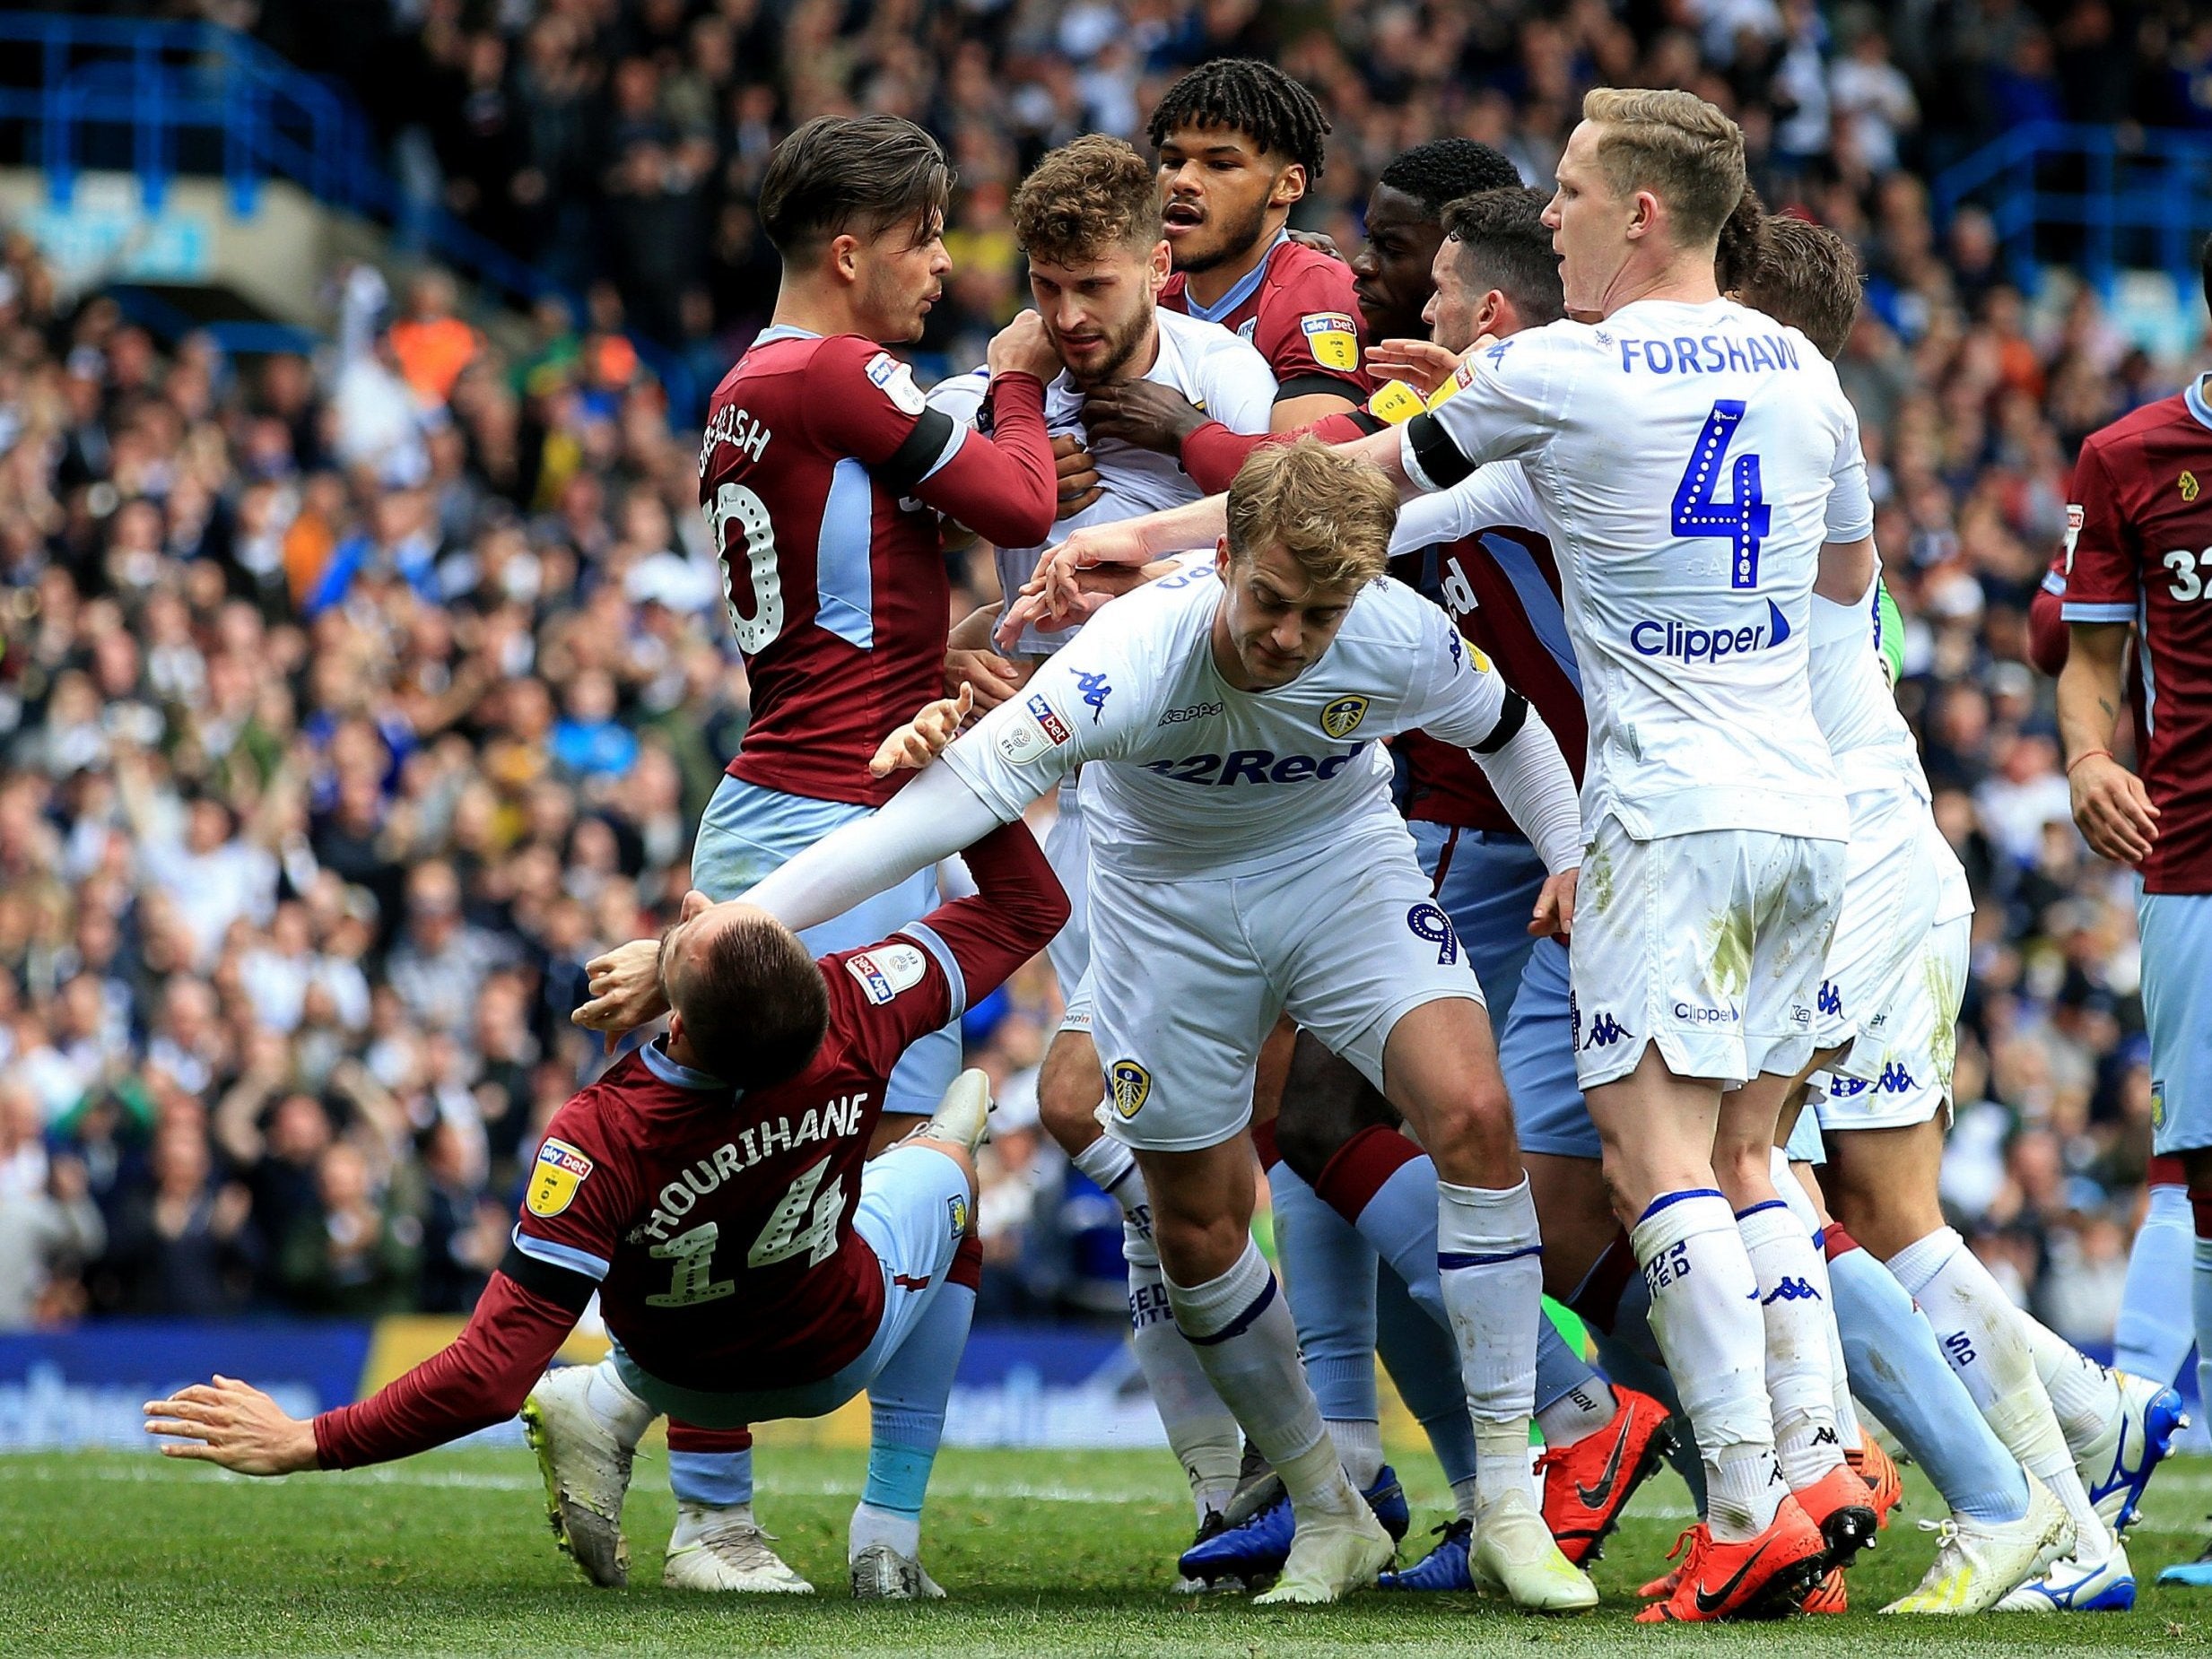 Patrick Bamford was involved in a melee with Aston Villa players